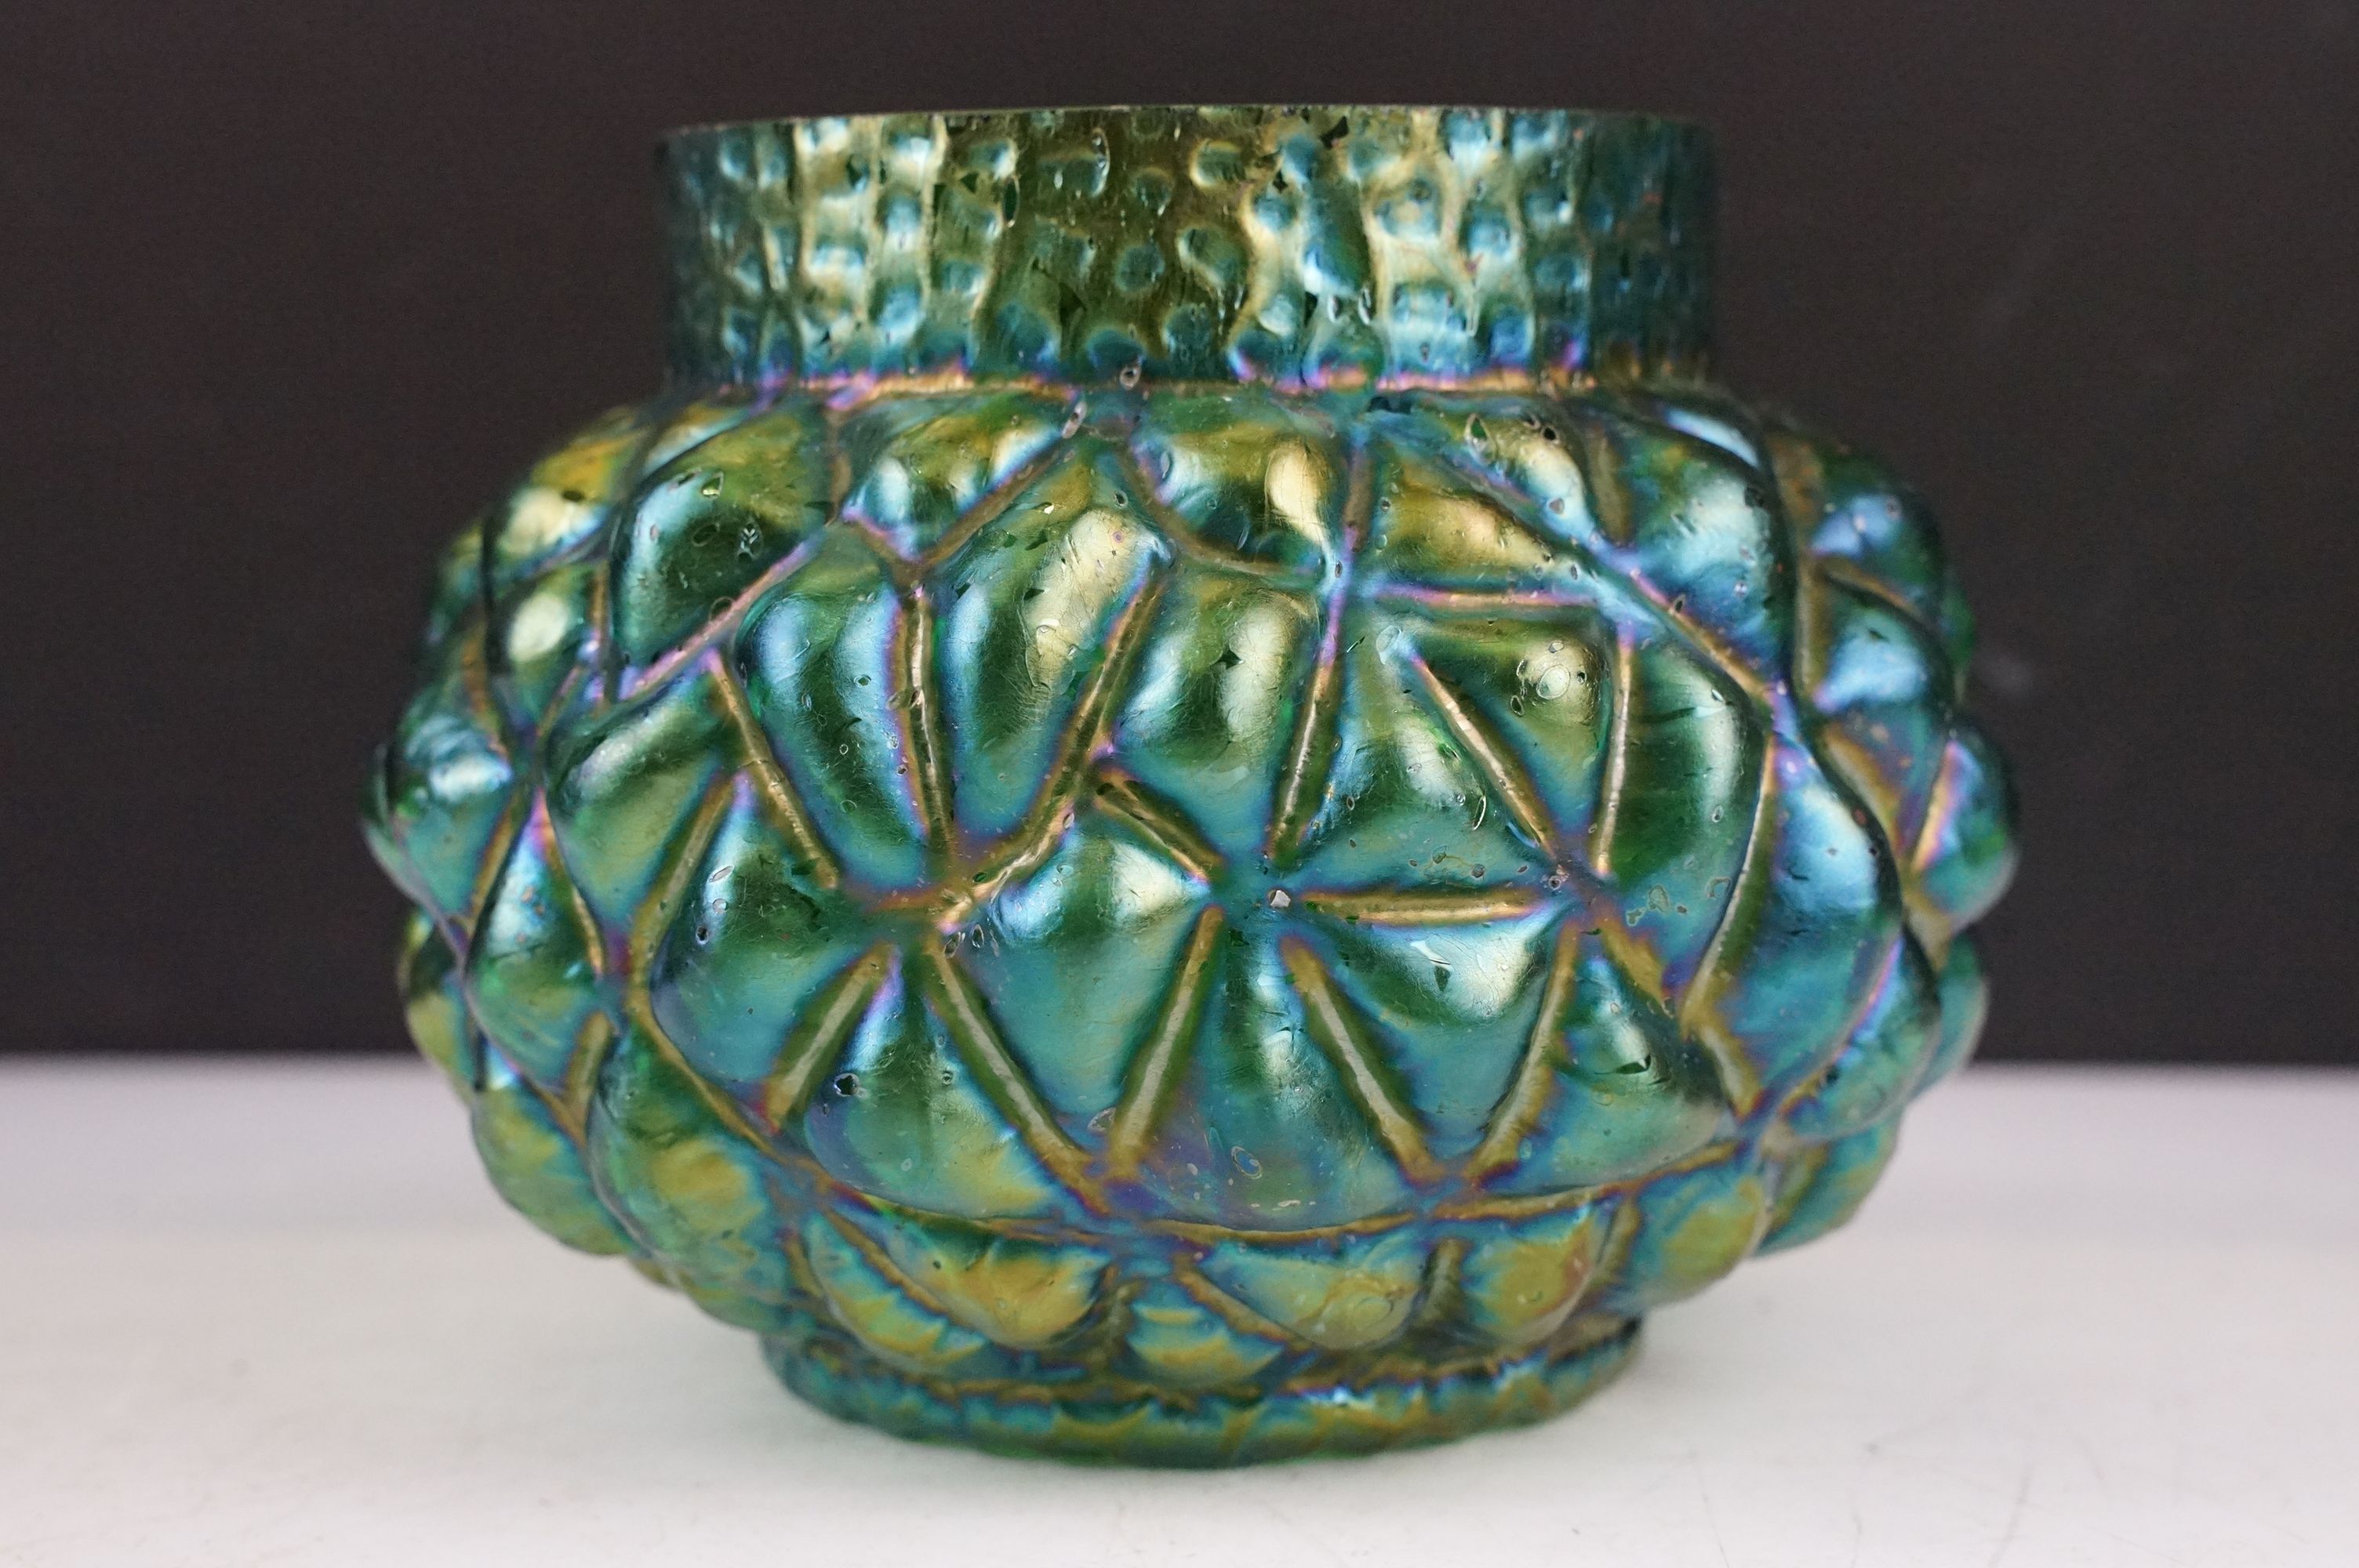 Two early 20th century Kralik iridescent glass rose bowls to include a green glass textured - Image 12 of 14